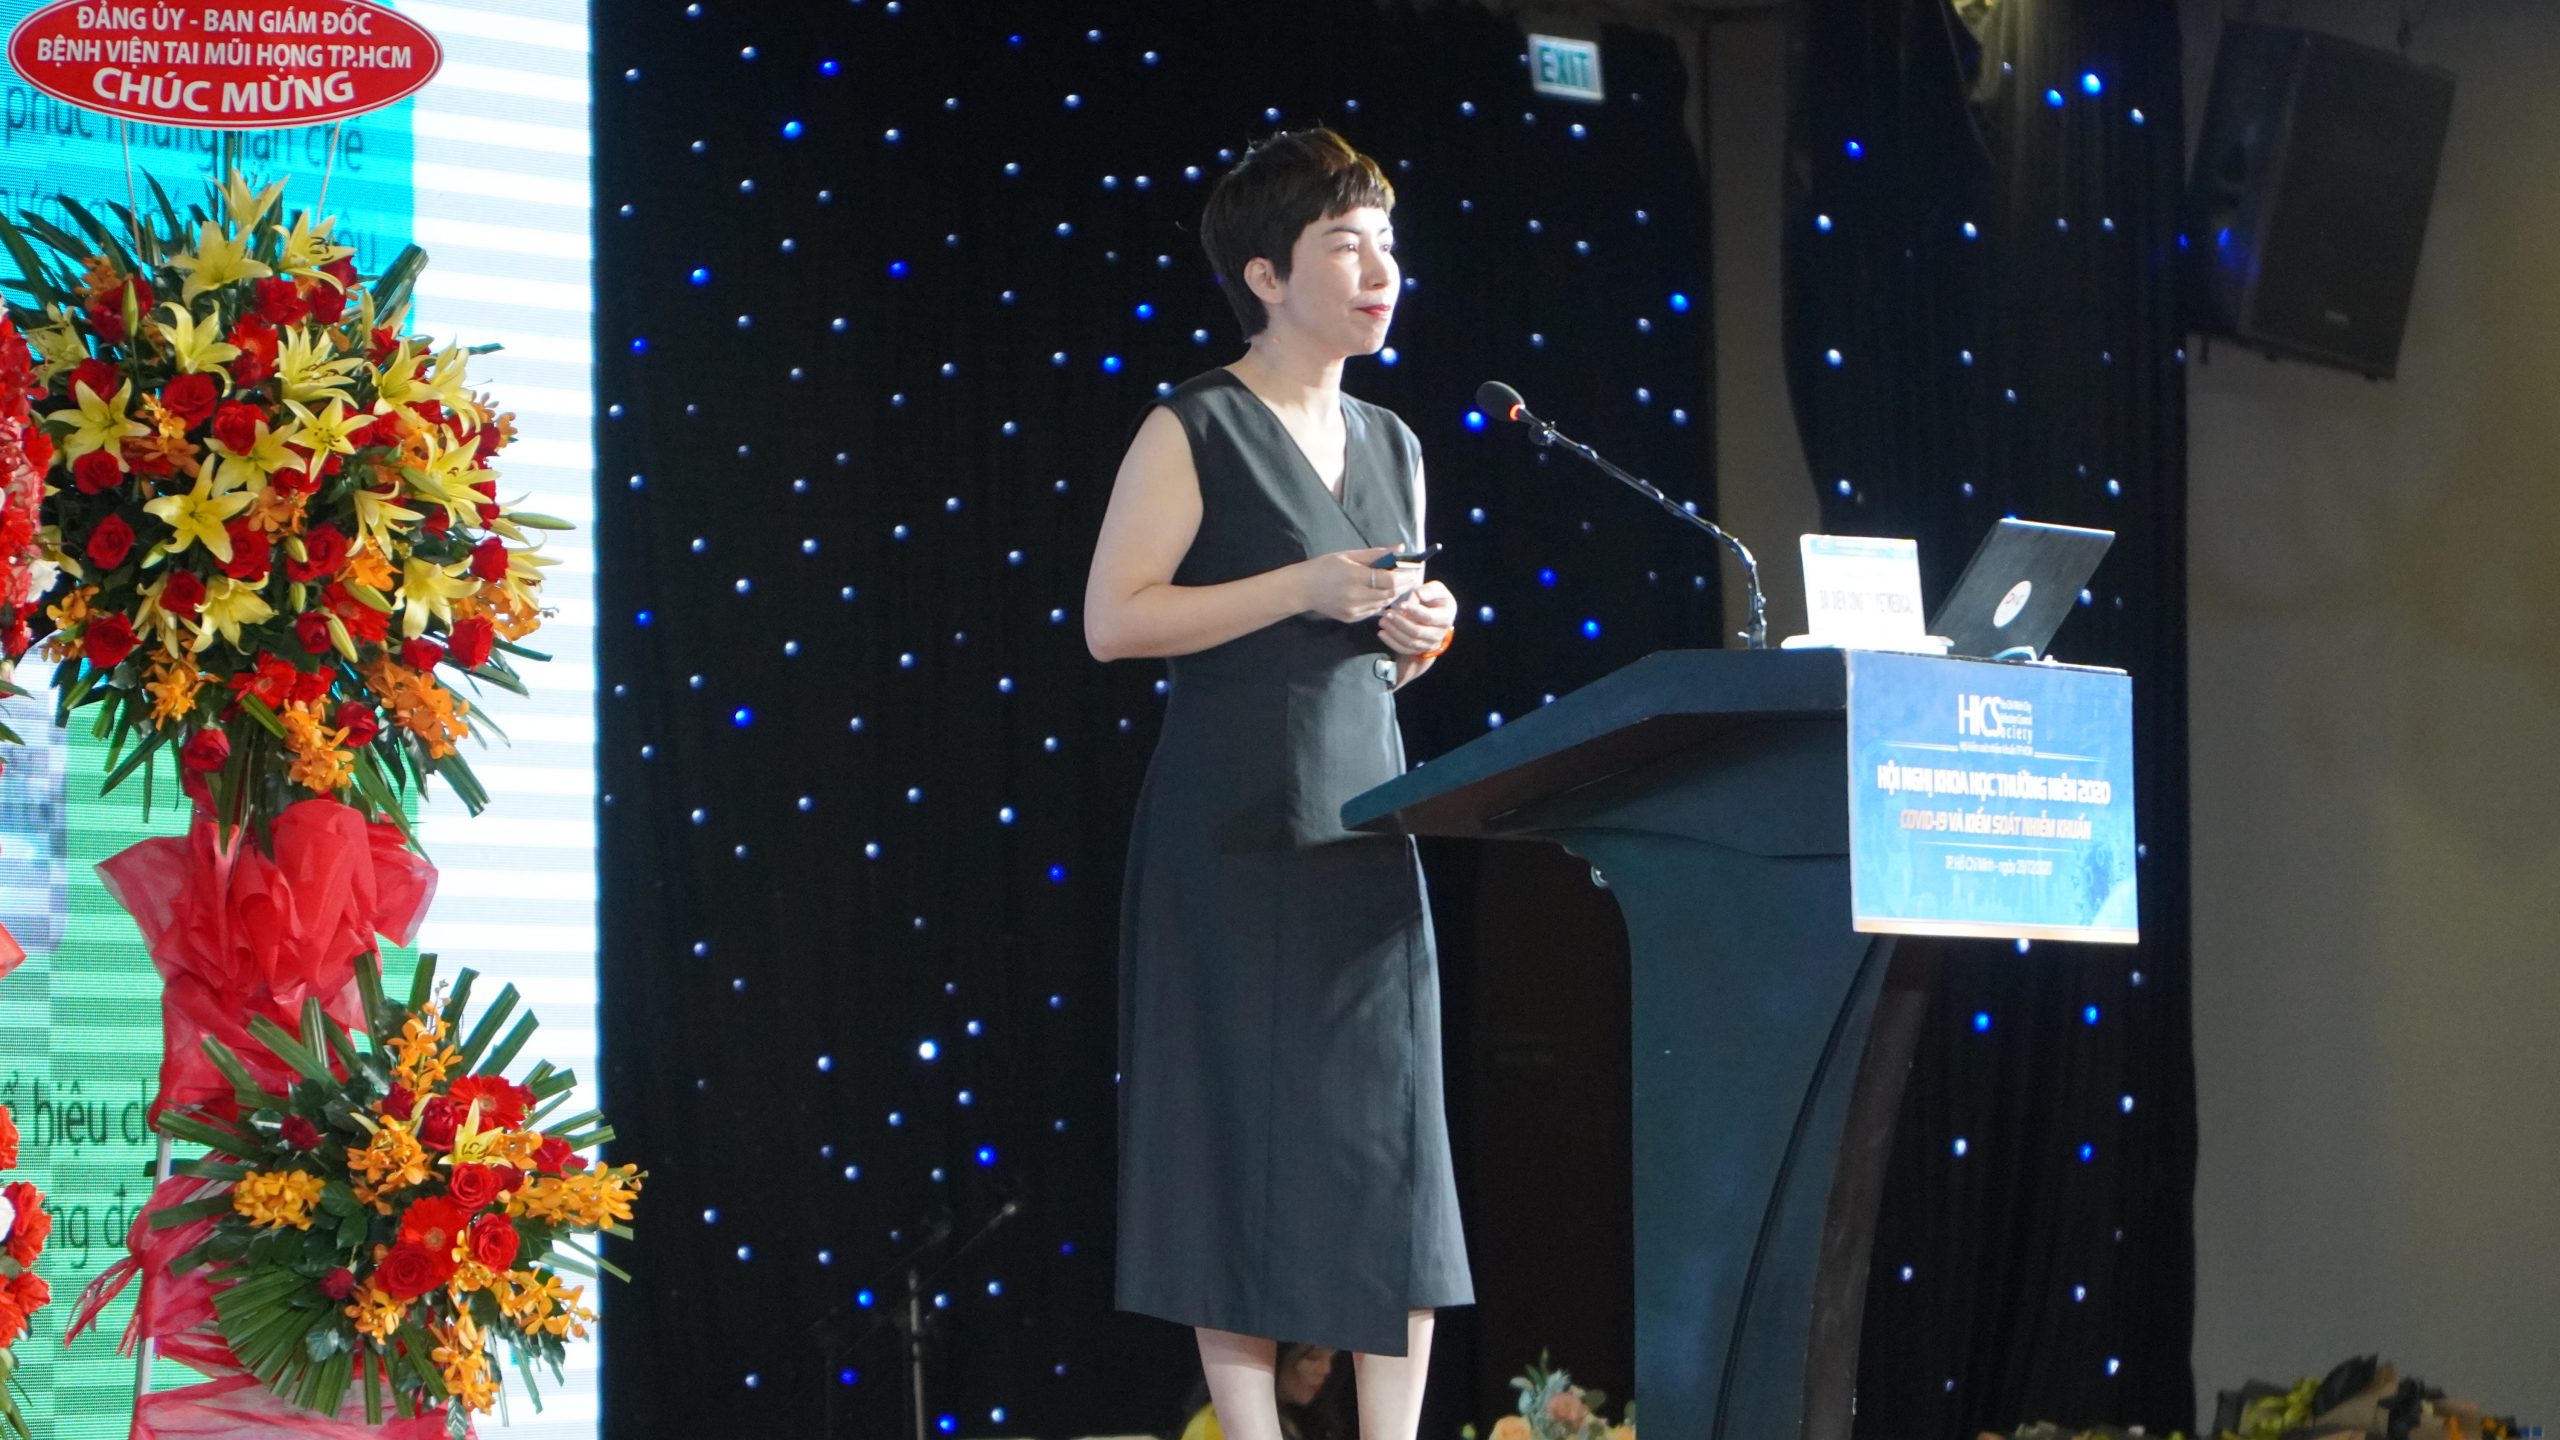 Dr. Hoang Oanh – Deputy Director of Vietmedical’s Infection Control unit presents the scientific report with the content “Application of advanced solutions in infection control